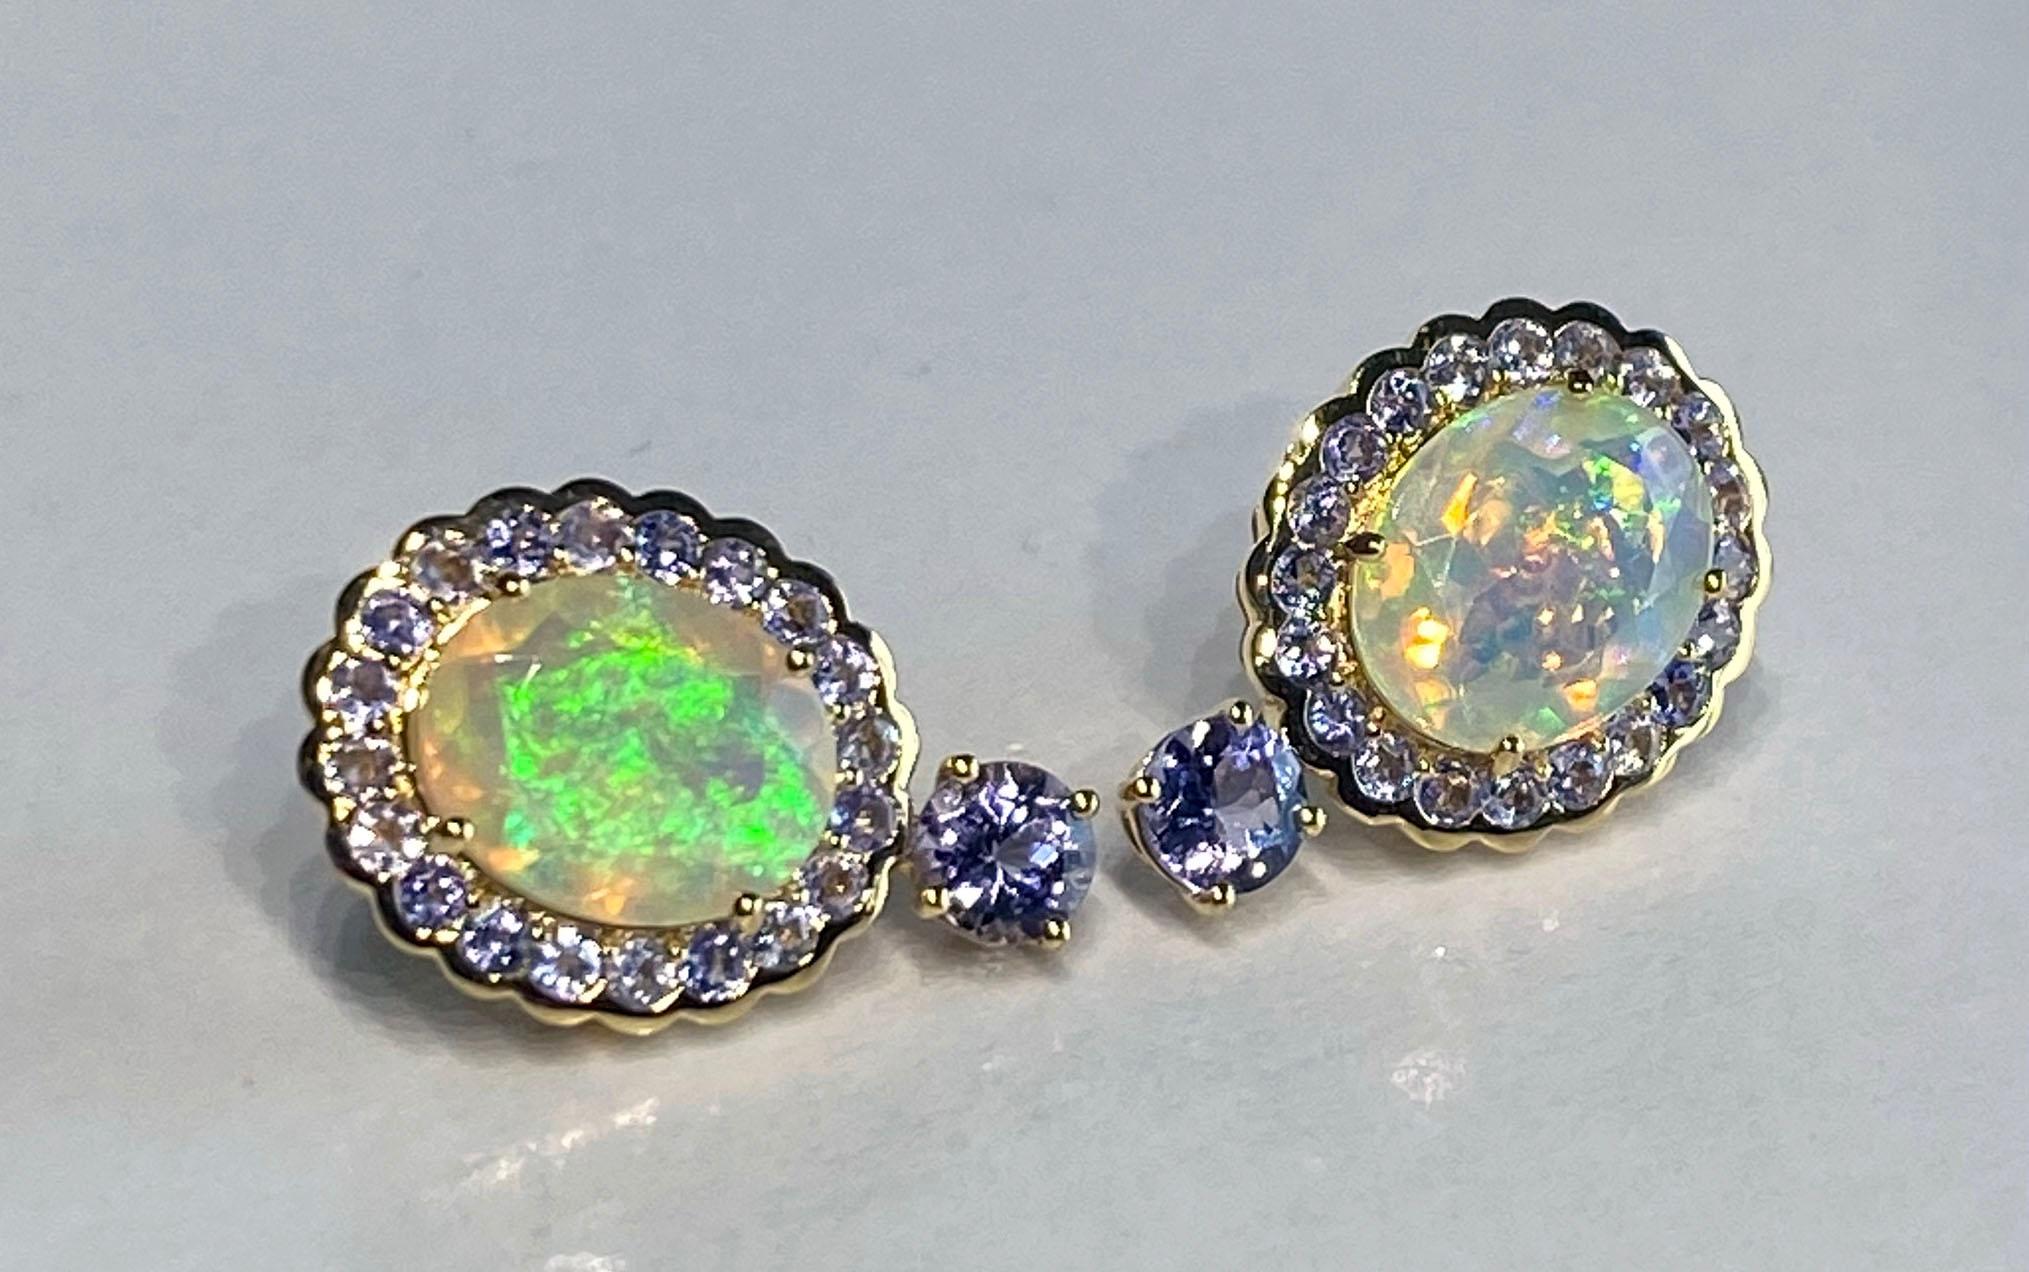 14kt Yellow Gold Earrings with Tanzanite & Crystal Opal
These lovely earrings are set with 40, 2.5 MM Round Brilliant Tanzanites & 2, 4MM Round Brilliant Tanzanites, Two Oval Cut 10 x13MM Australian Crystal Opals all set in shining 14kt Yellow